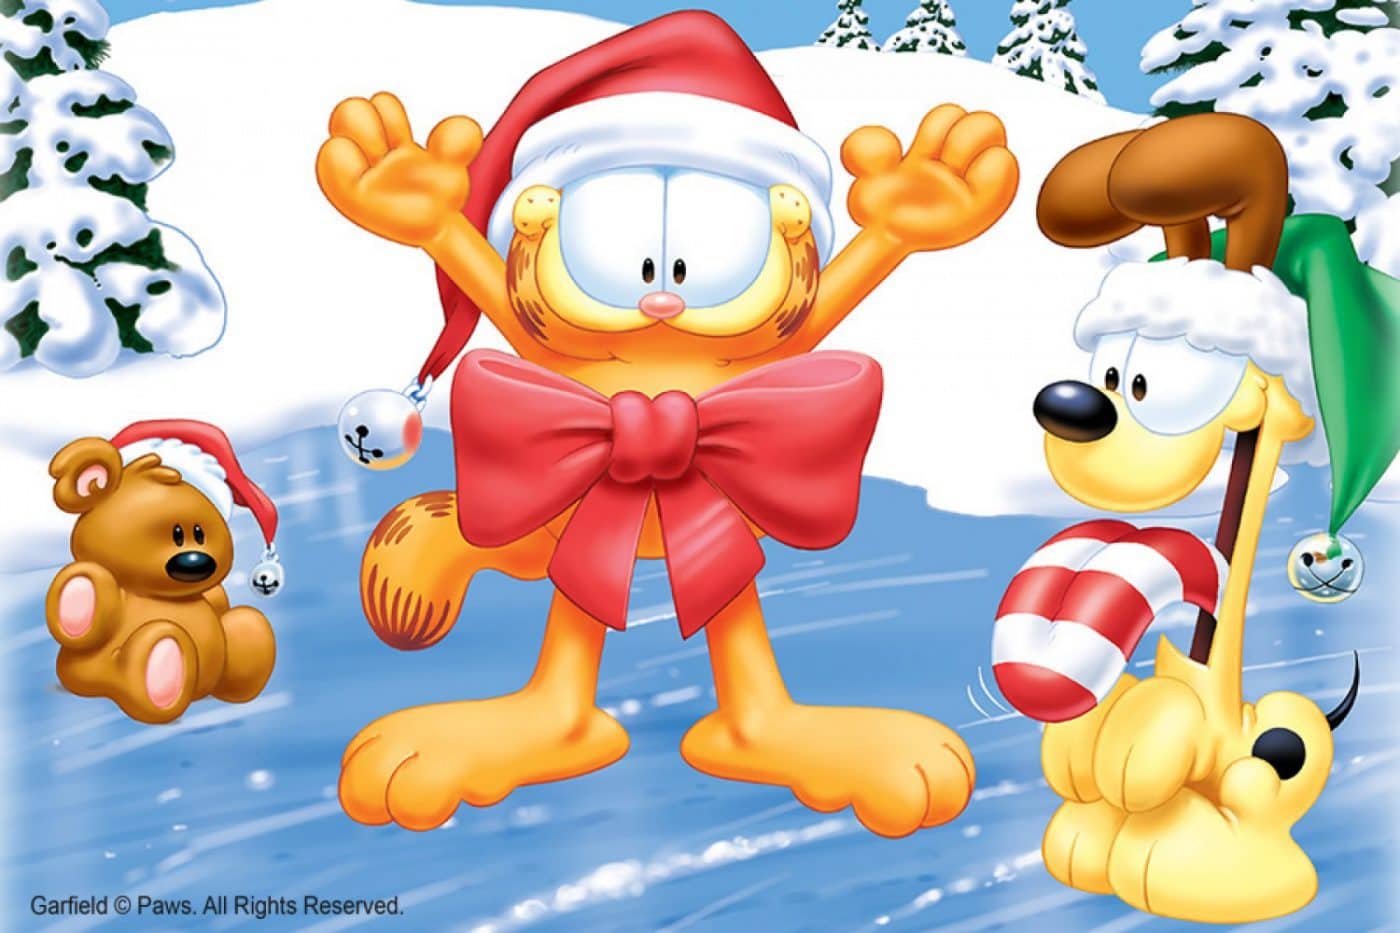 Garfield Christmas Special on Showmax